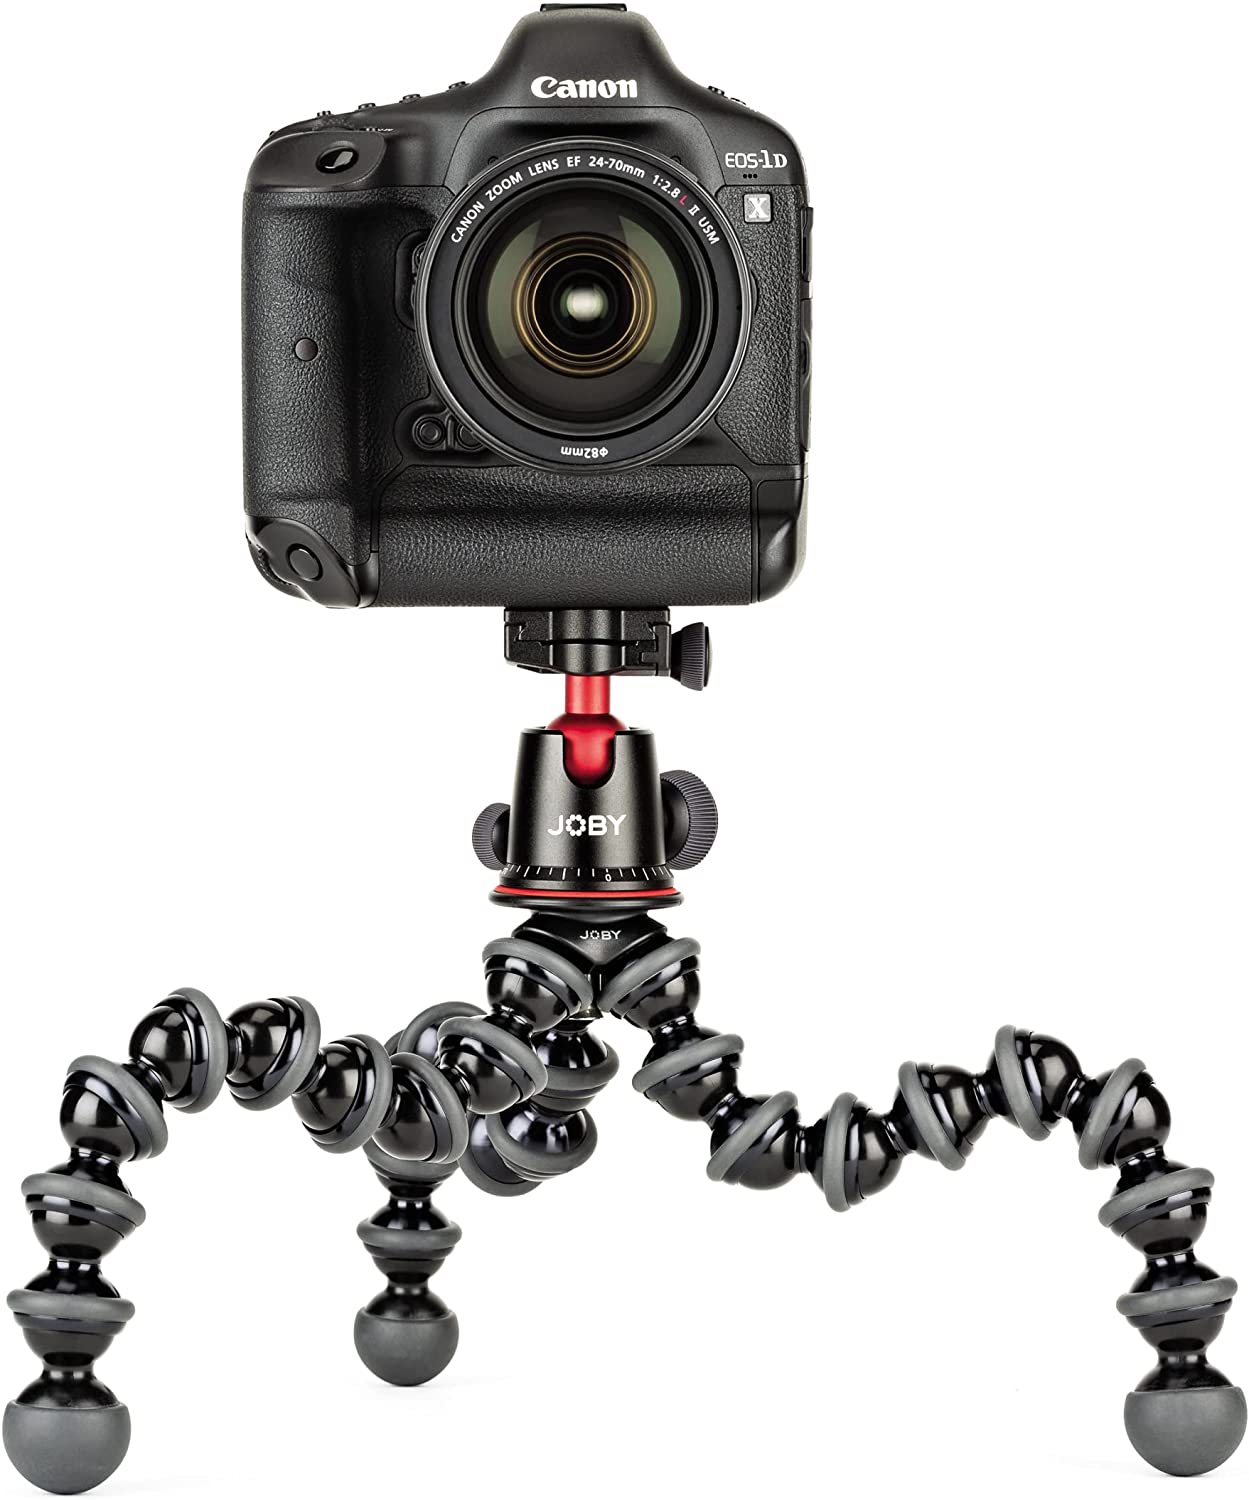 JOBY GorillaPod 5K Kit, Flexible Professional Tripod with BallHead for DSLR and CSC/Mirrorless Camera Up to 5 kg Payload